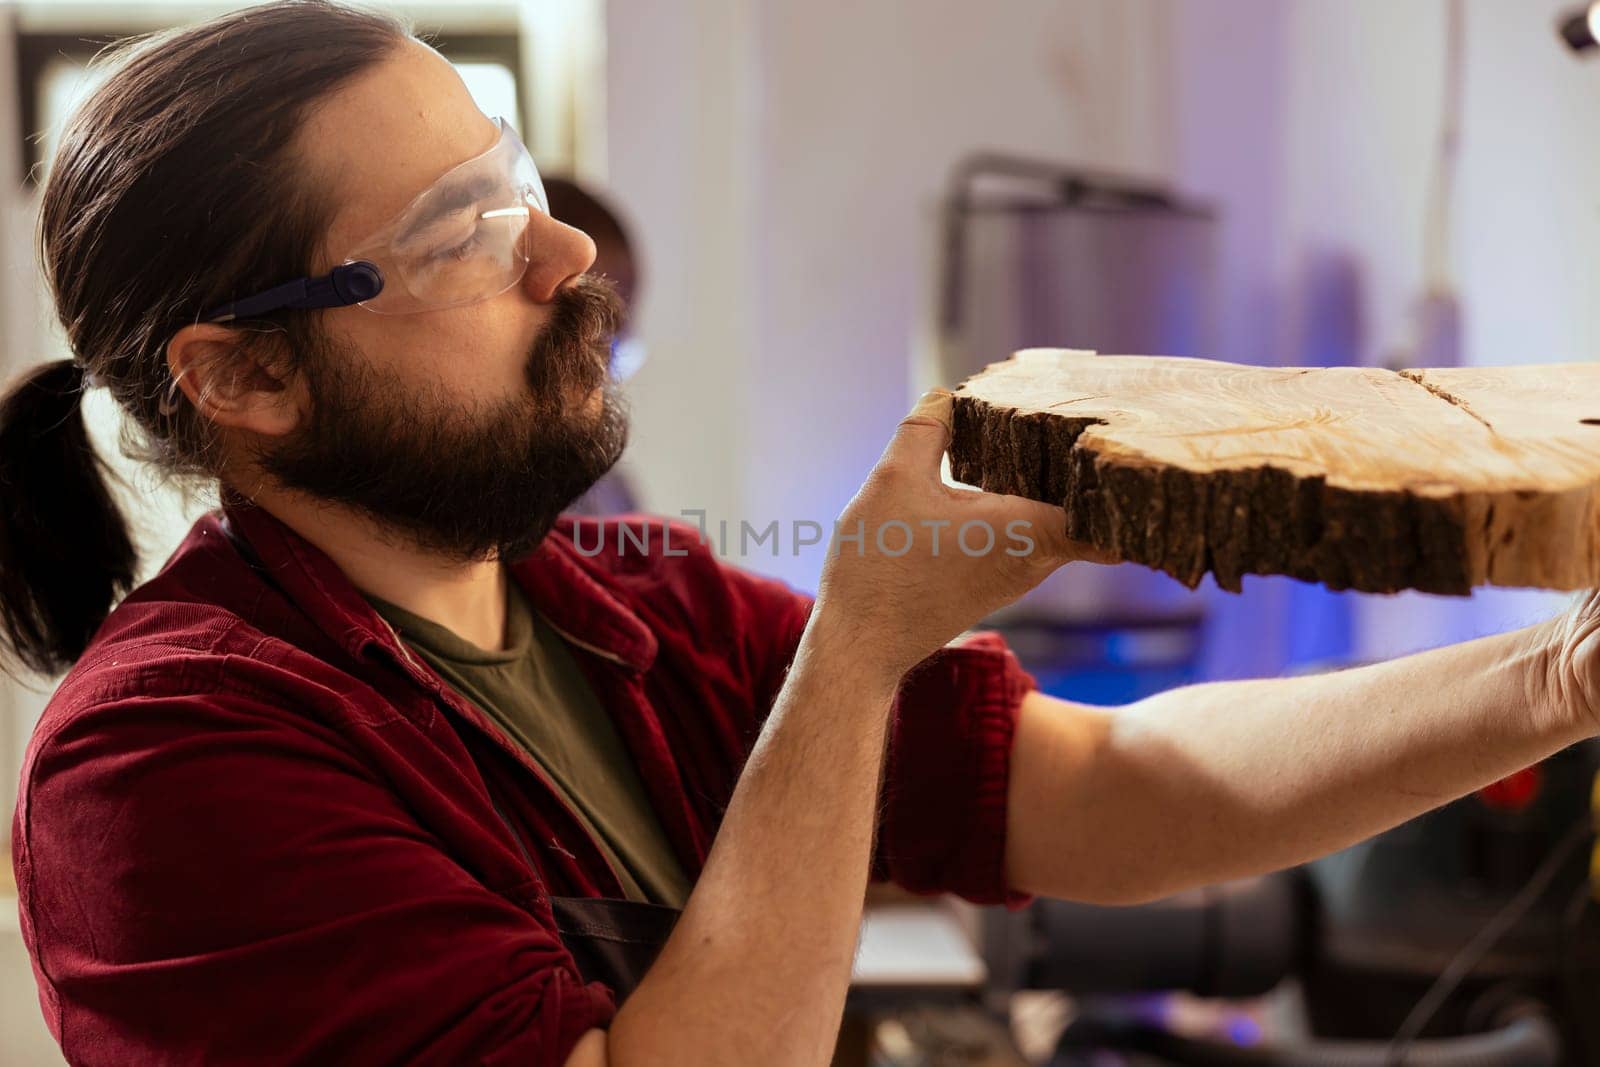 Carpenter in woodworking shop wearing protection glasses, inspecting wood before assembling furniture. Cabinetmaker using safety equipment in joinery, evaluating lumber block